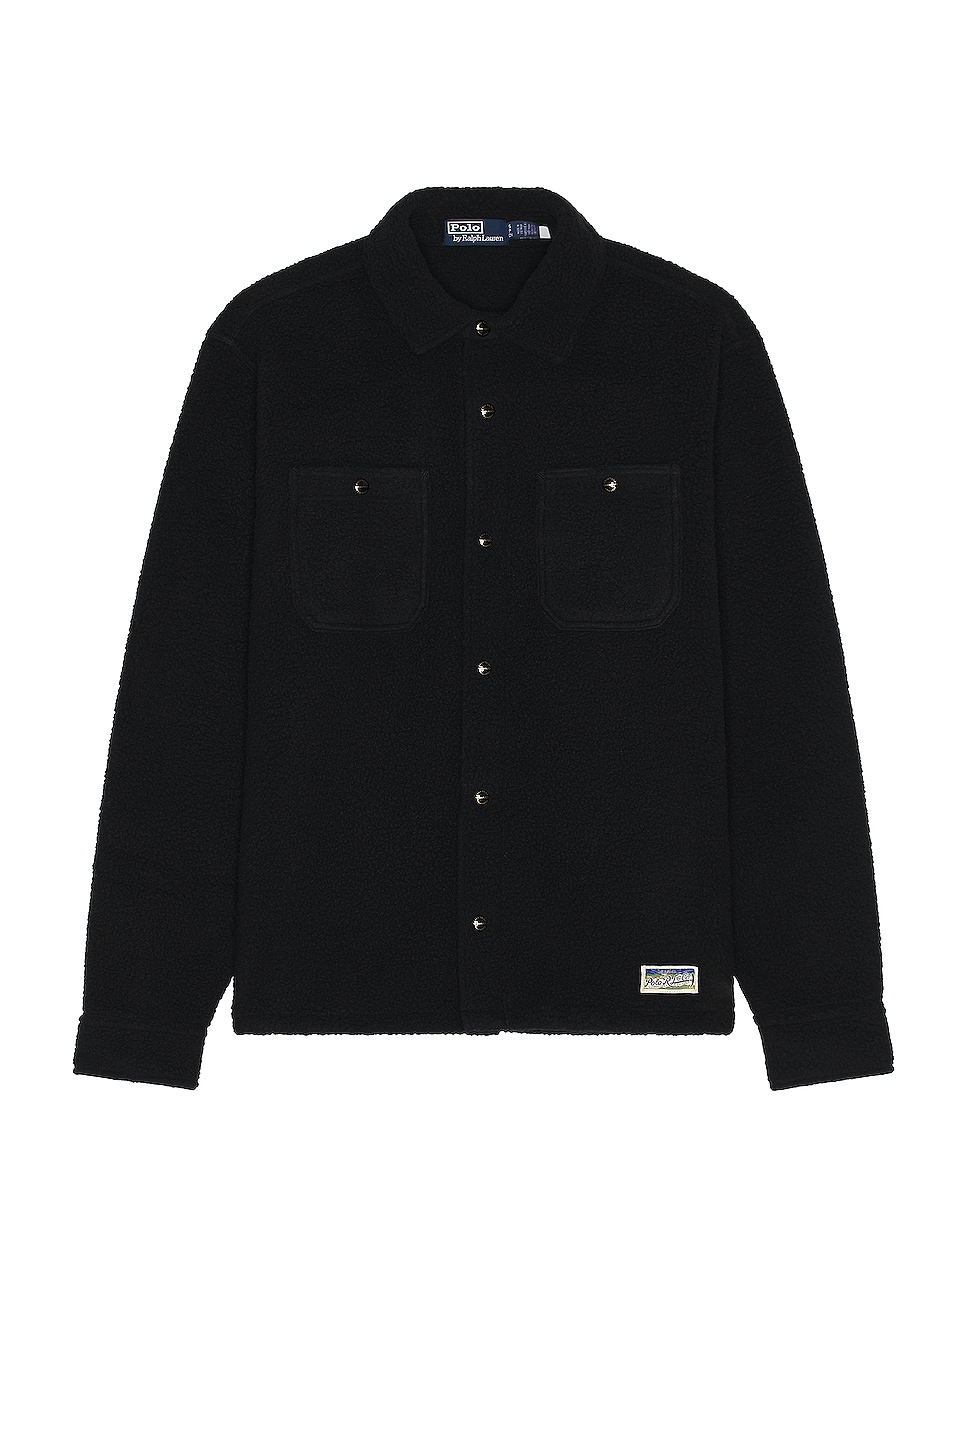 Image 1 of Polo Ralph Lauren Sport Shirt in Polo Black